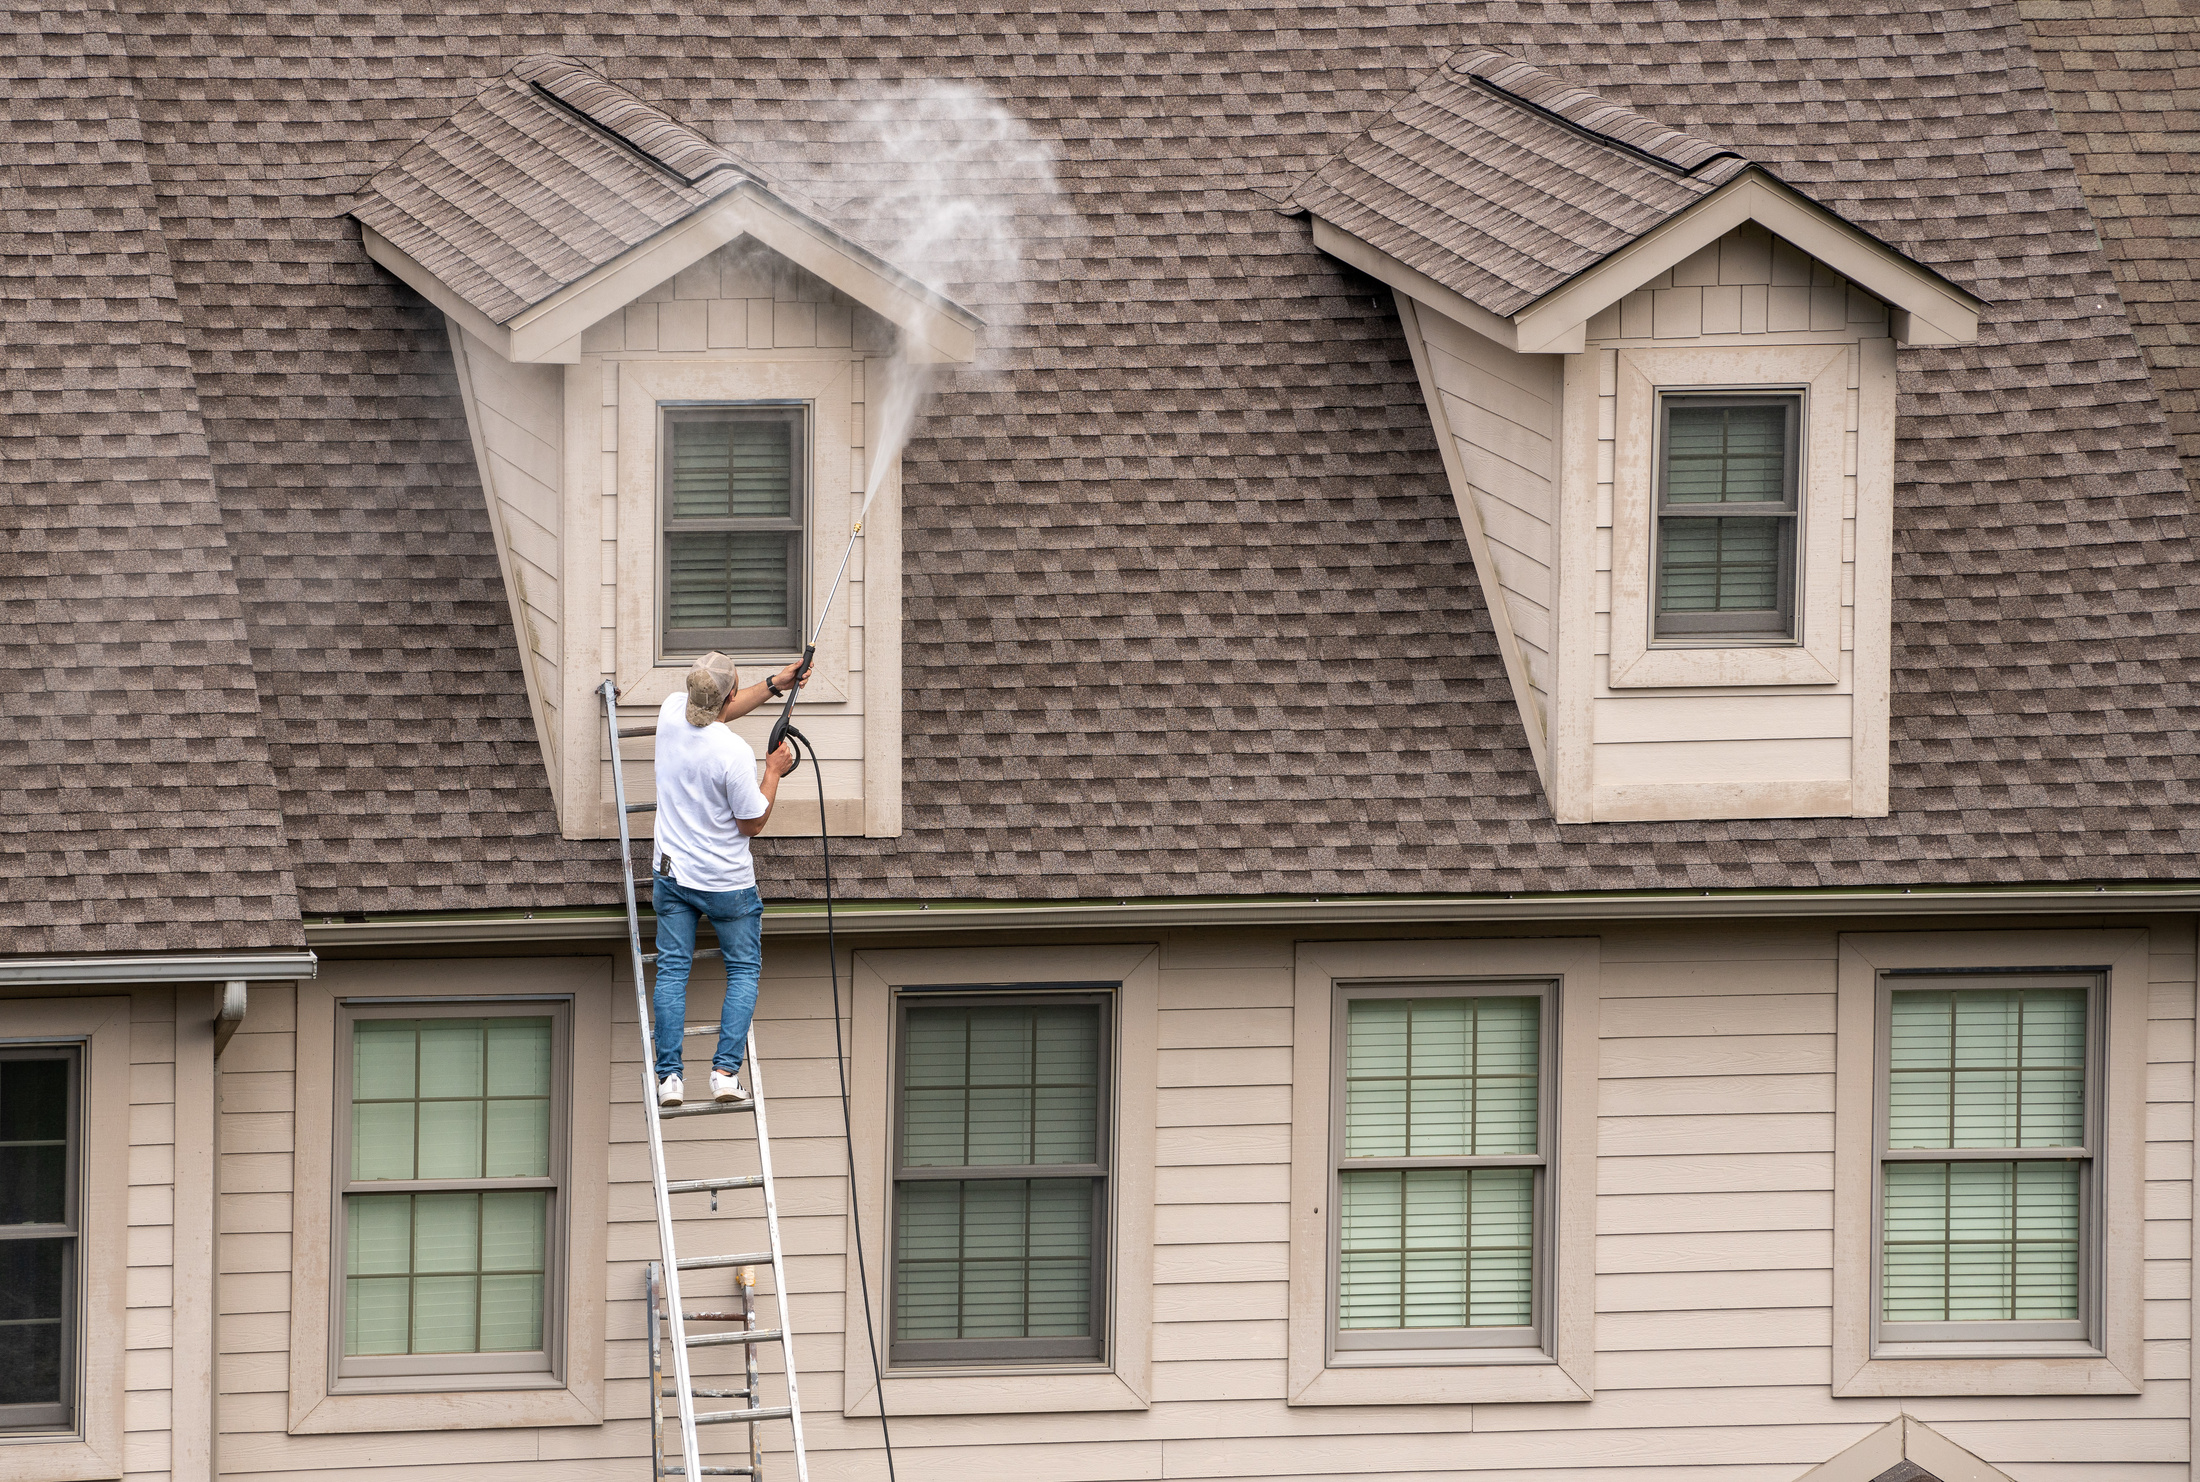 Worker on Ladder Pressure Washing Home Prior to Painting